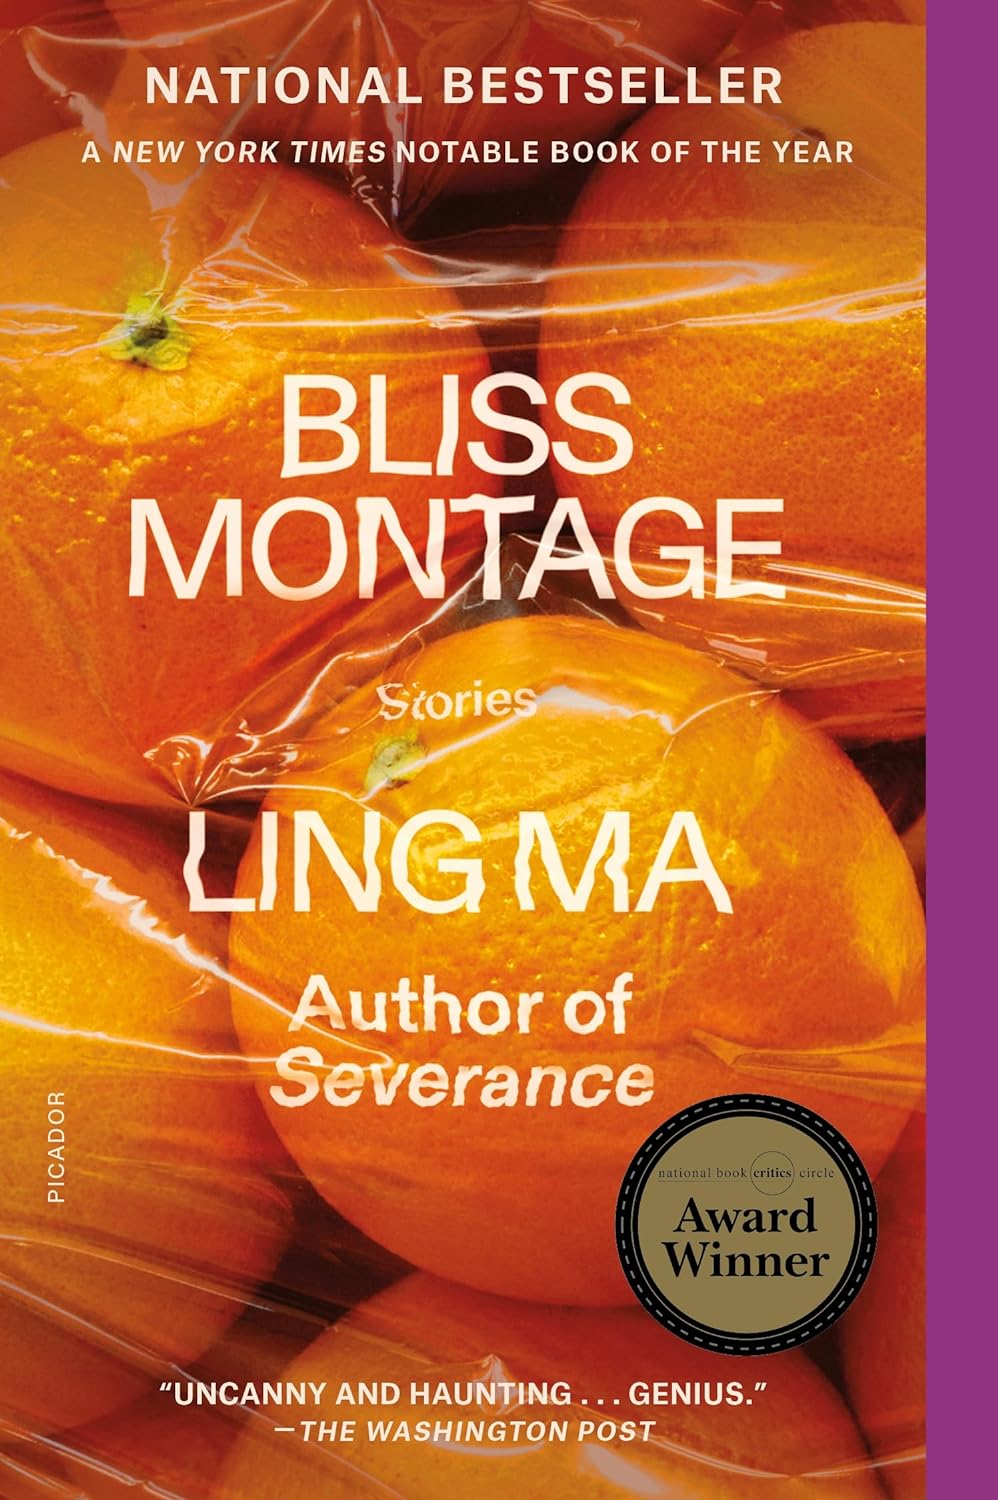 Bliss Montage: Stories by Ling Ma